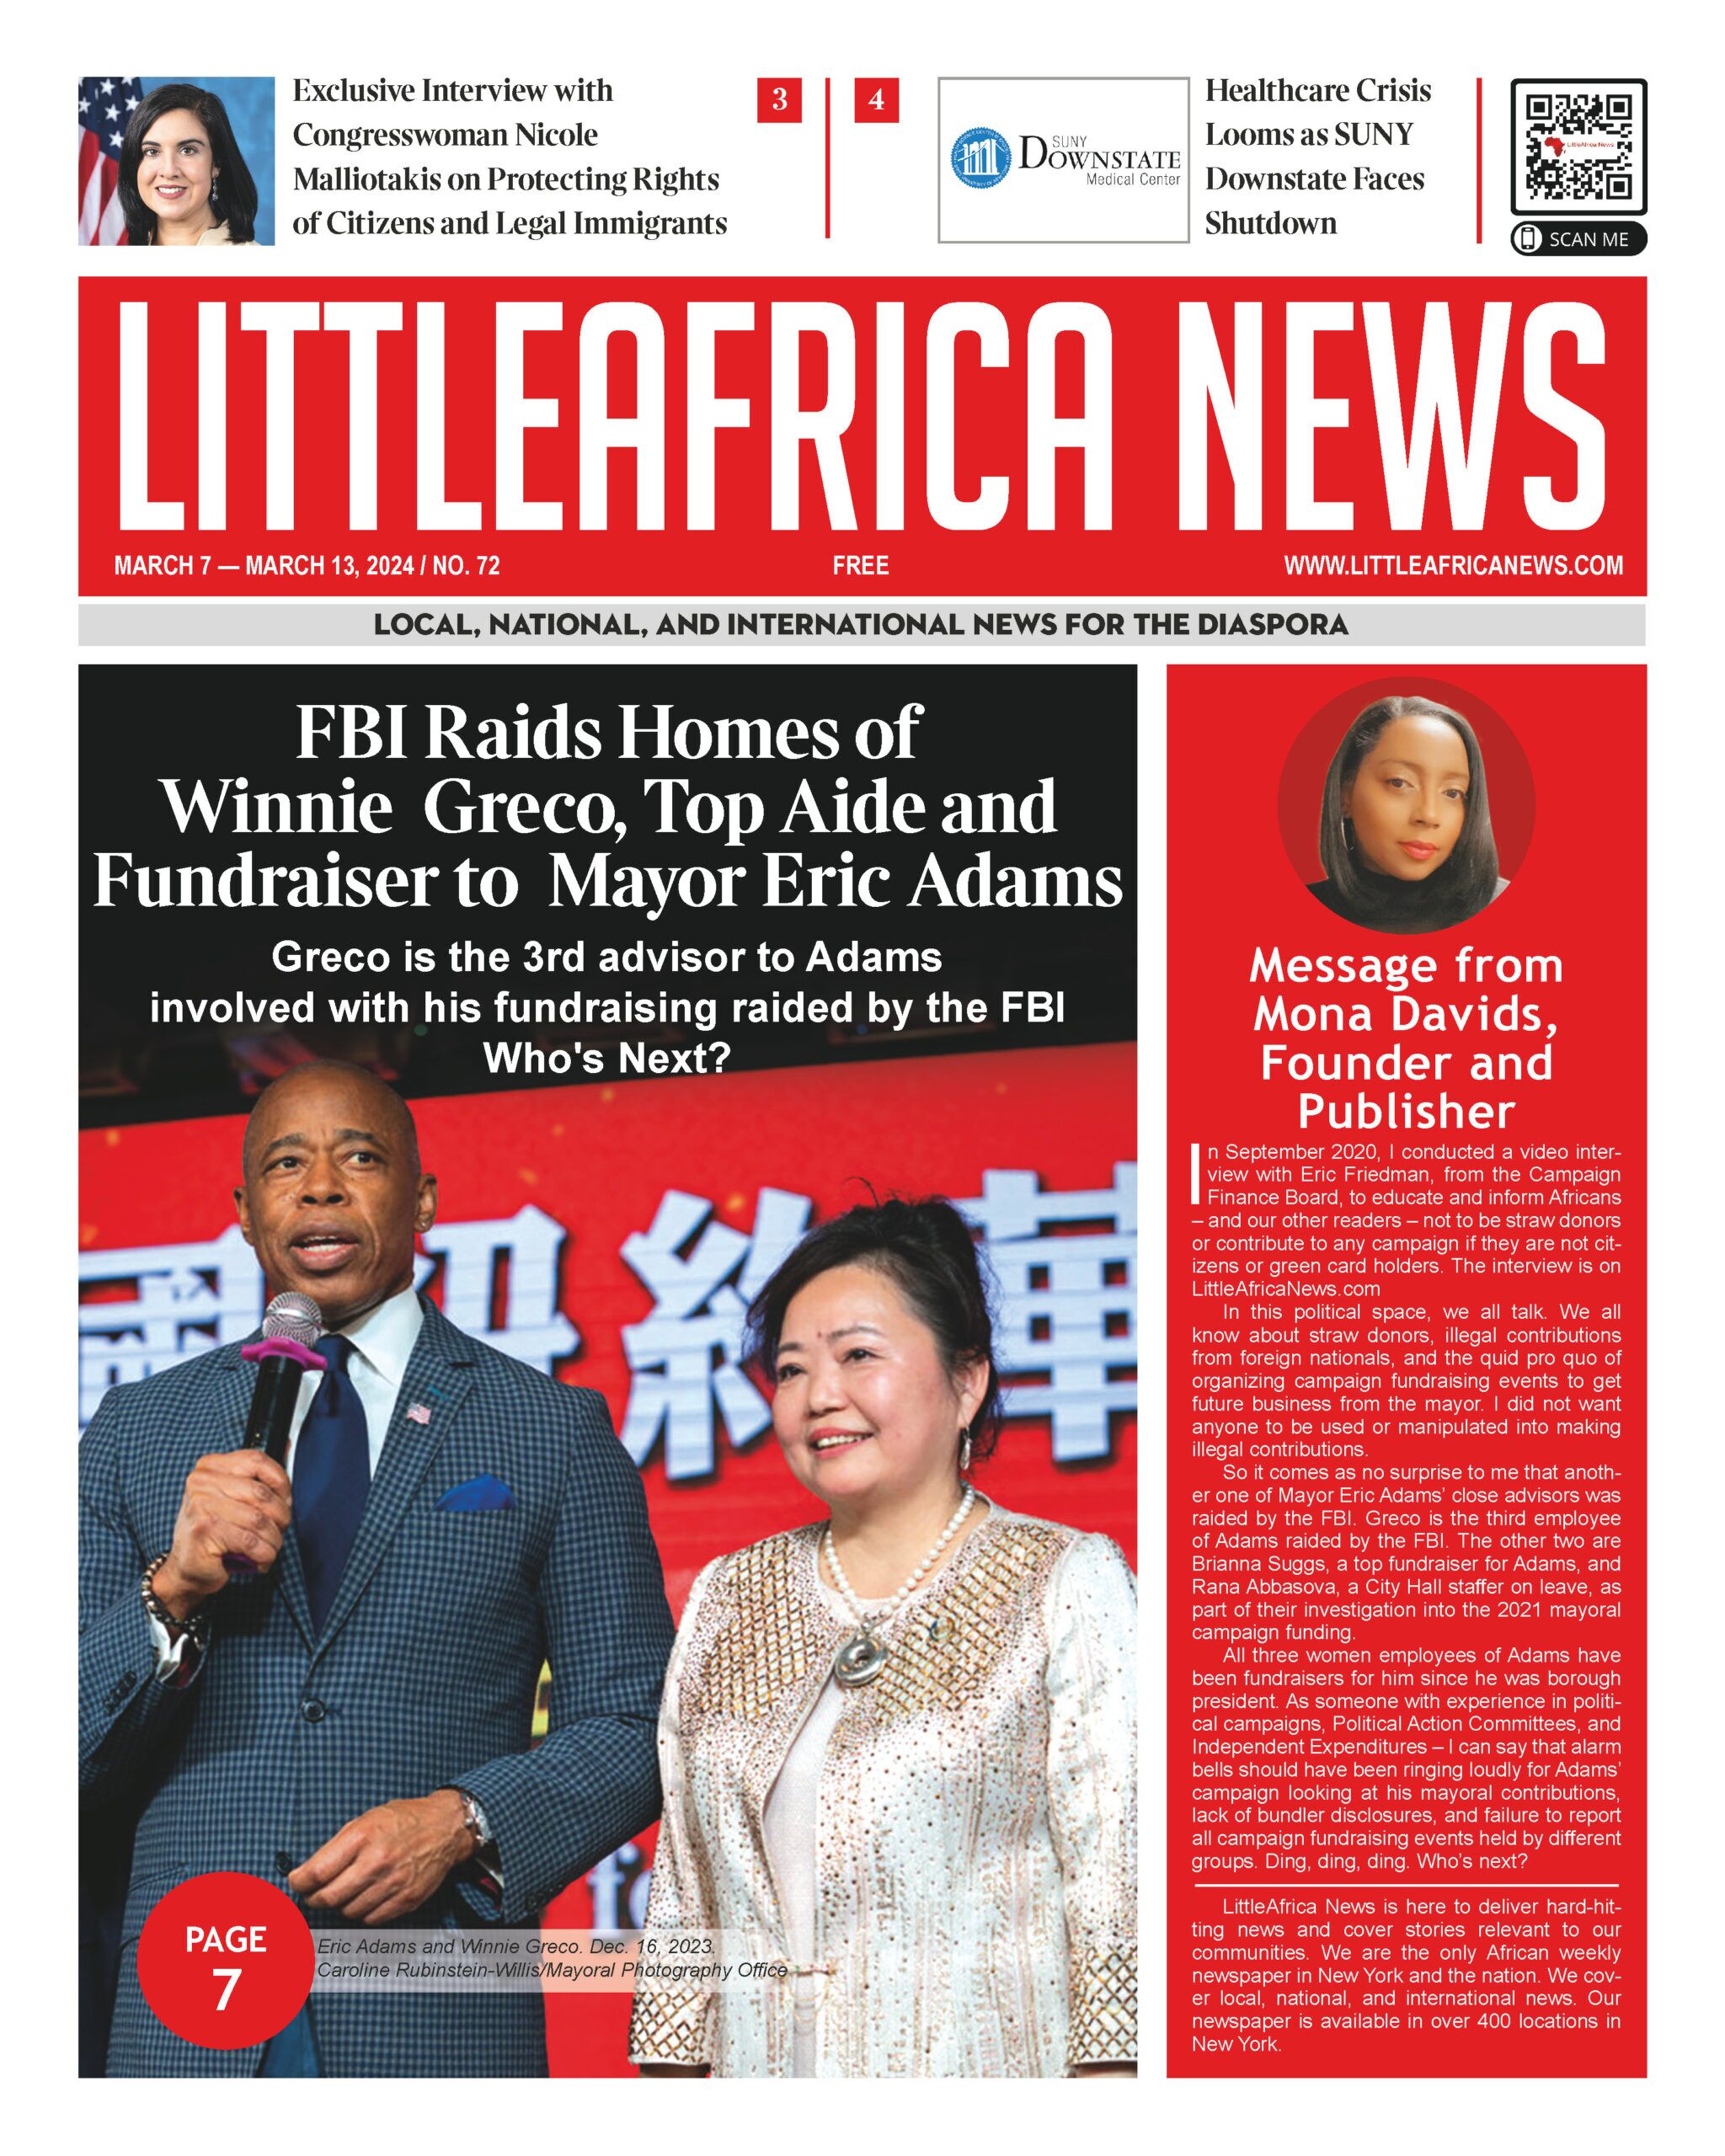 LittleAfrica News Newspaper_March7-March13_2024_FrontPage